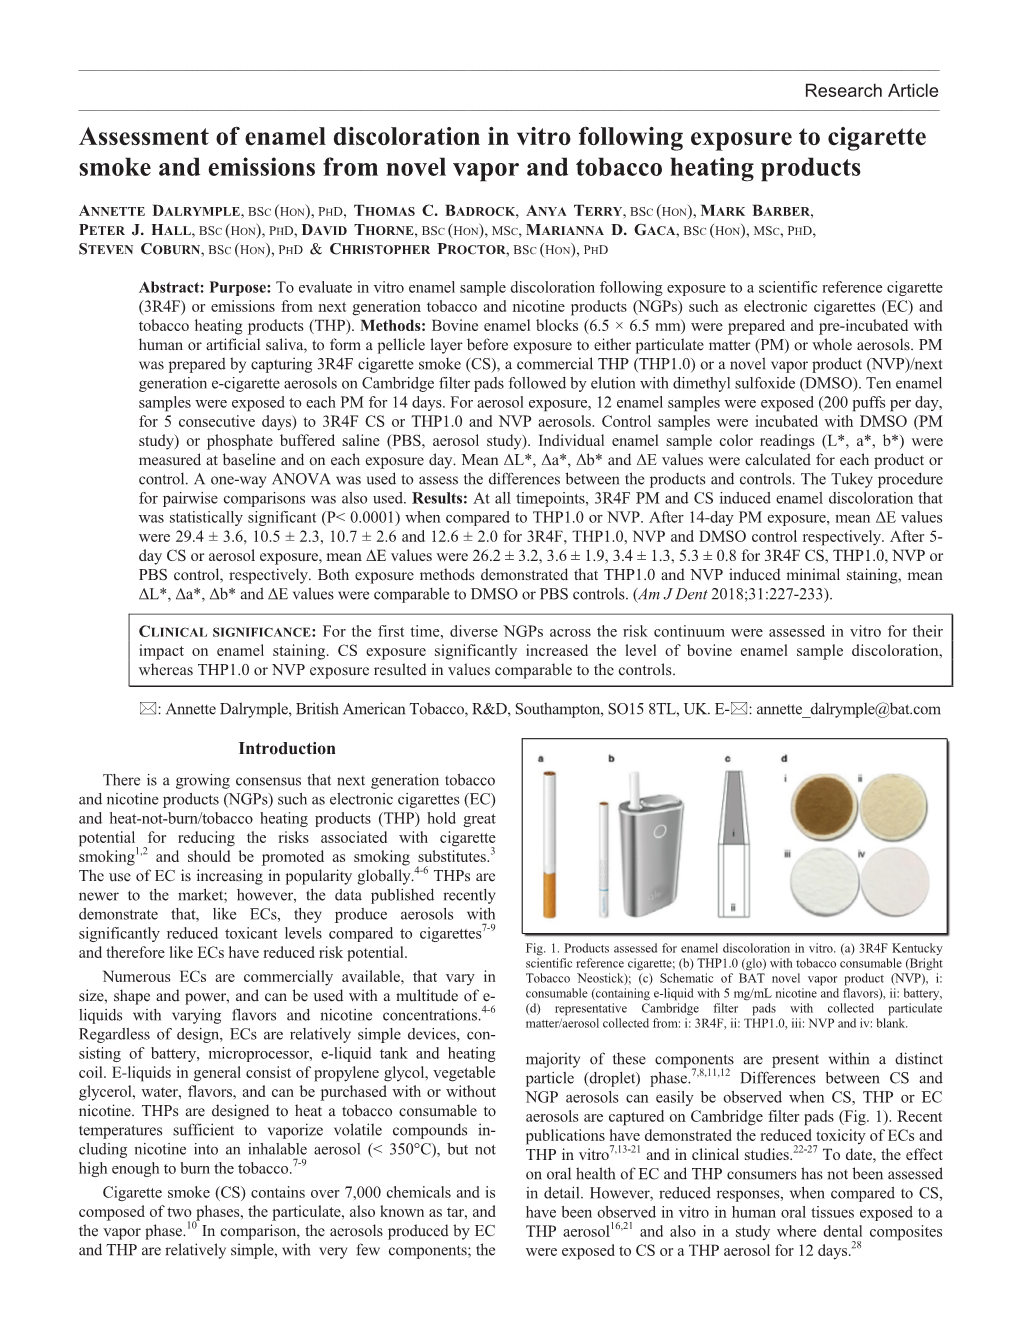 Assessment of Enamel Discoloration in Vitro Following Exposure to Cigarette Smoke and Emissions from Novel Vapor and Tobacco Heating Products